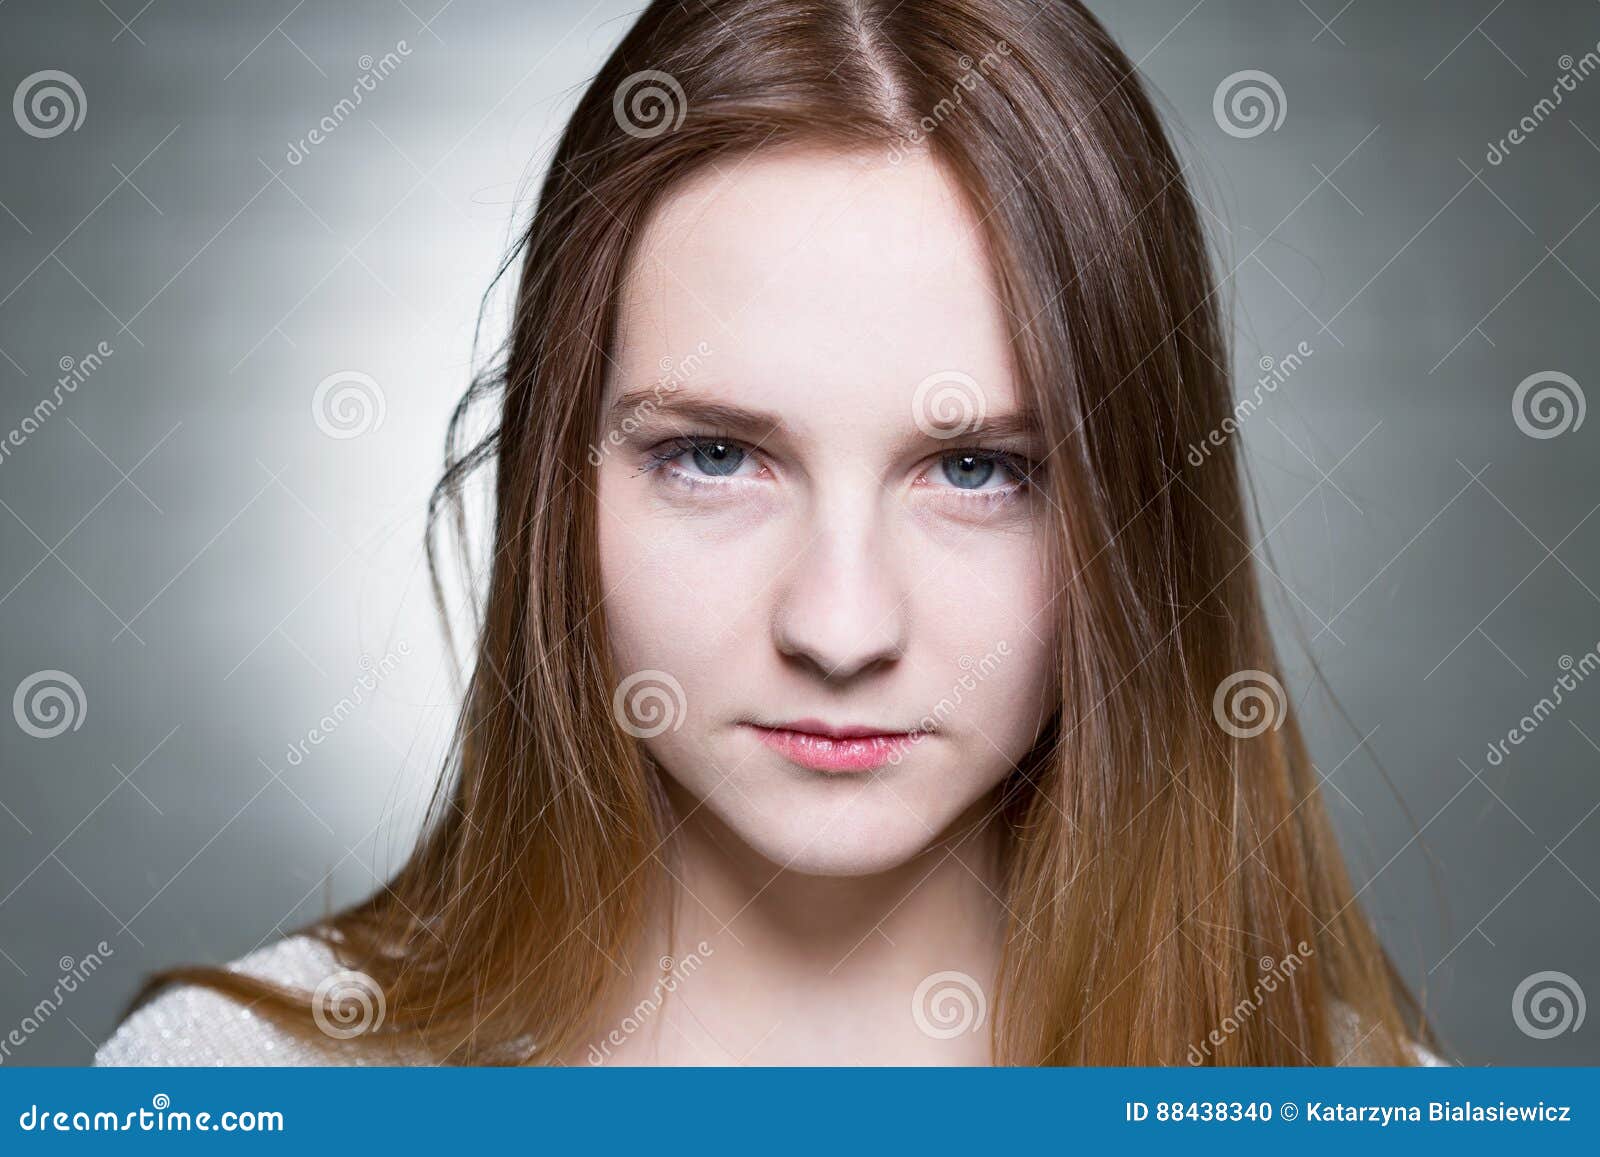 Serious Blonde Woman with Straight Hair - wide 6